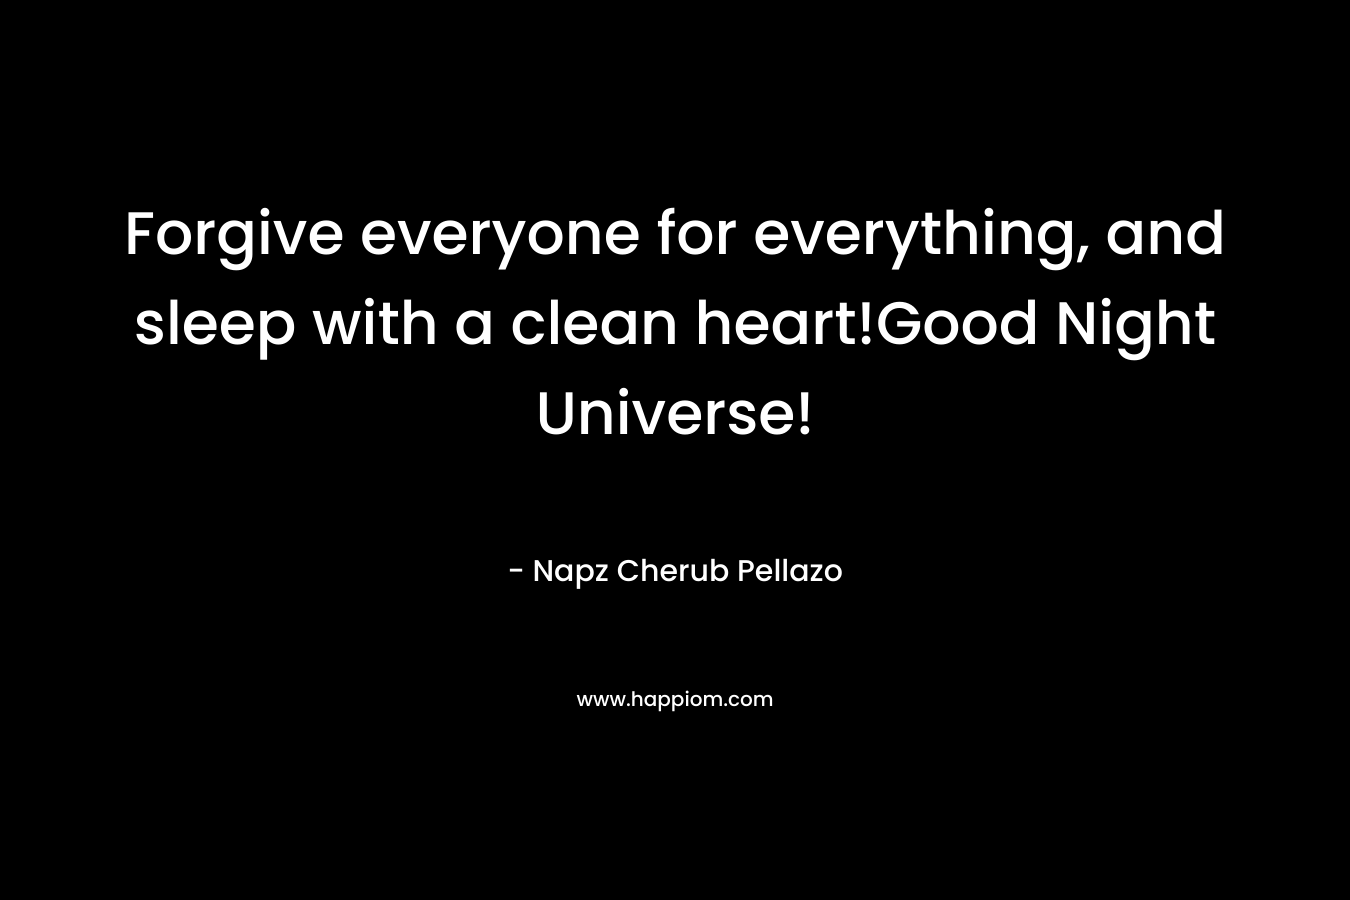 Forgive everyone for everything, and sleep with a clean heart!Good Night Universe!